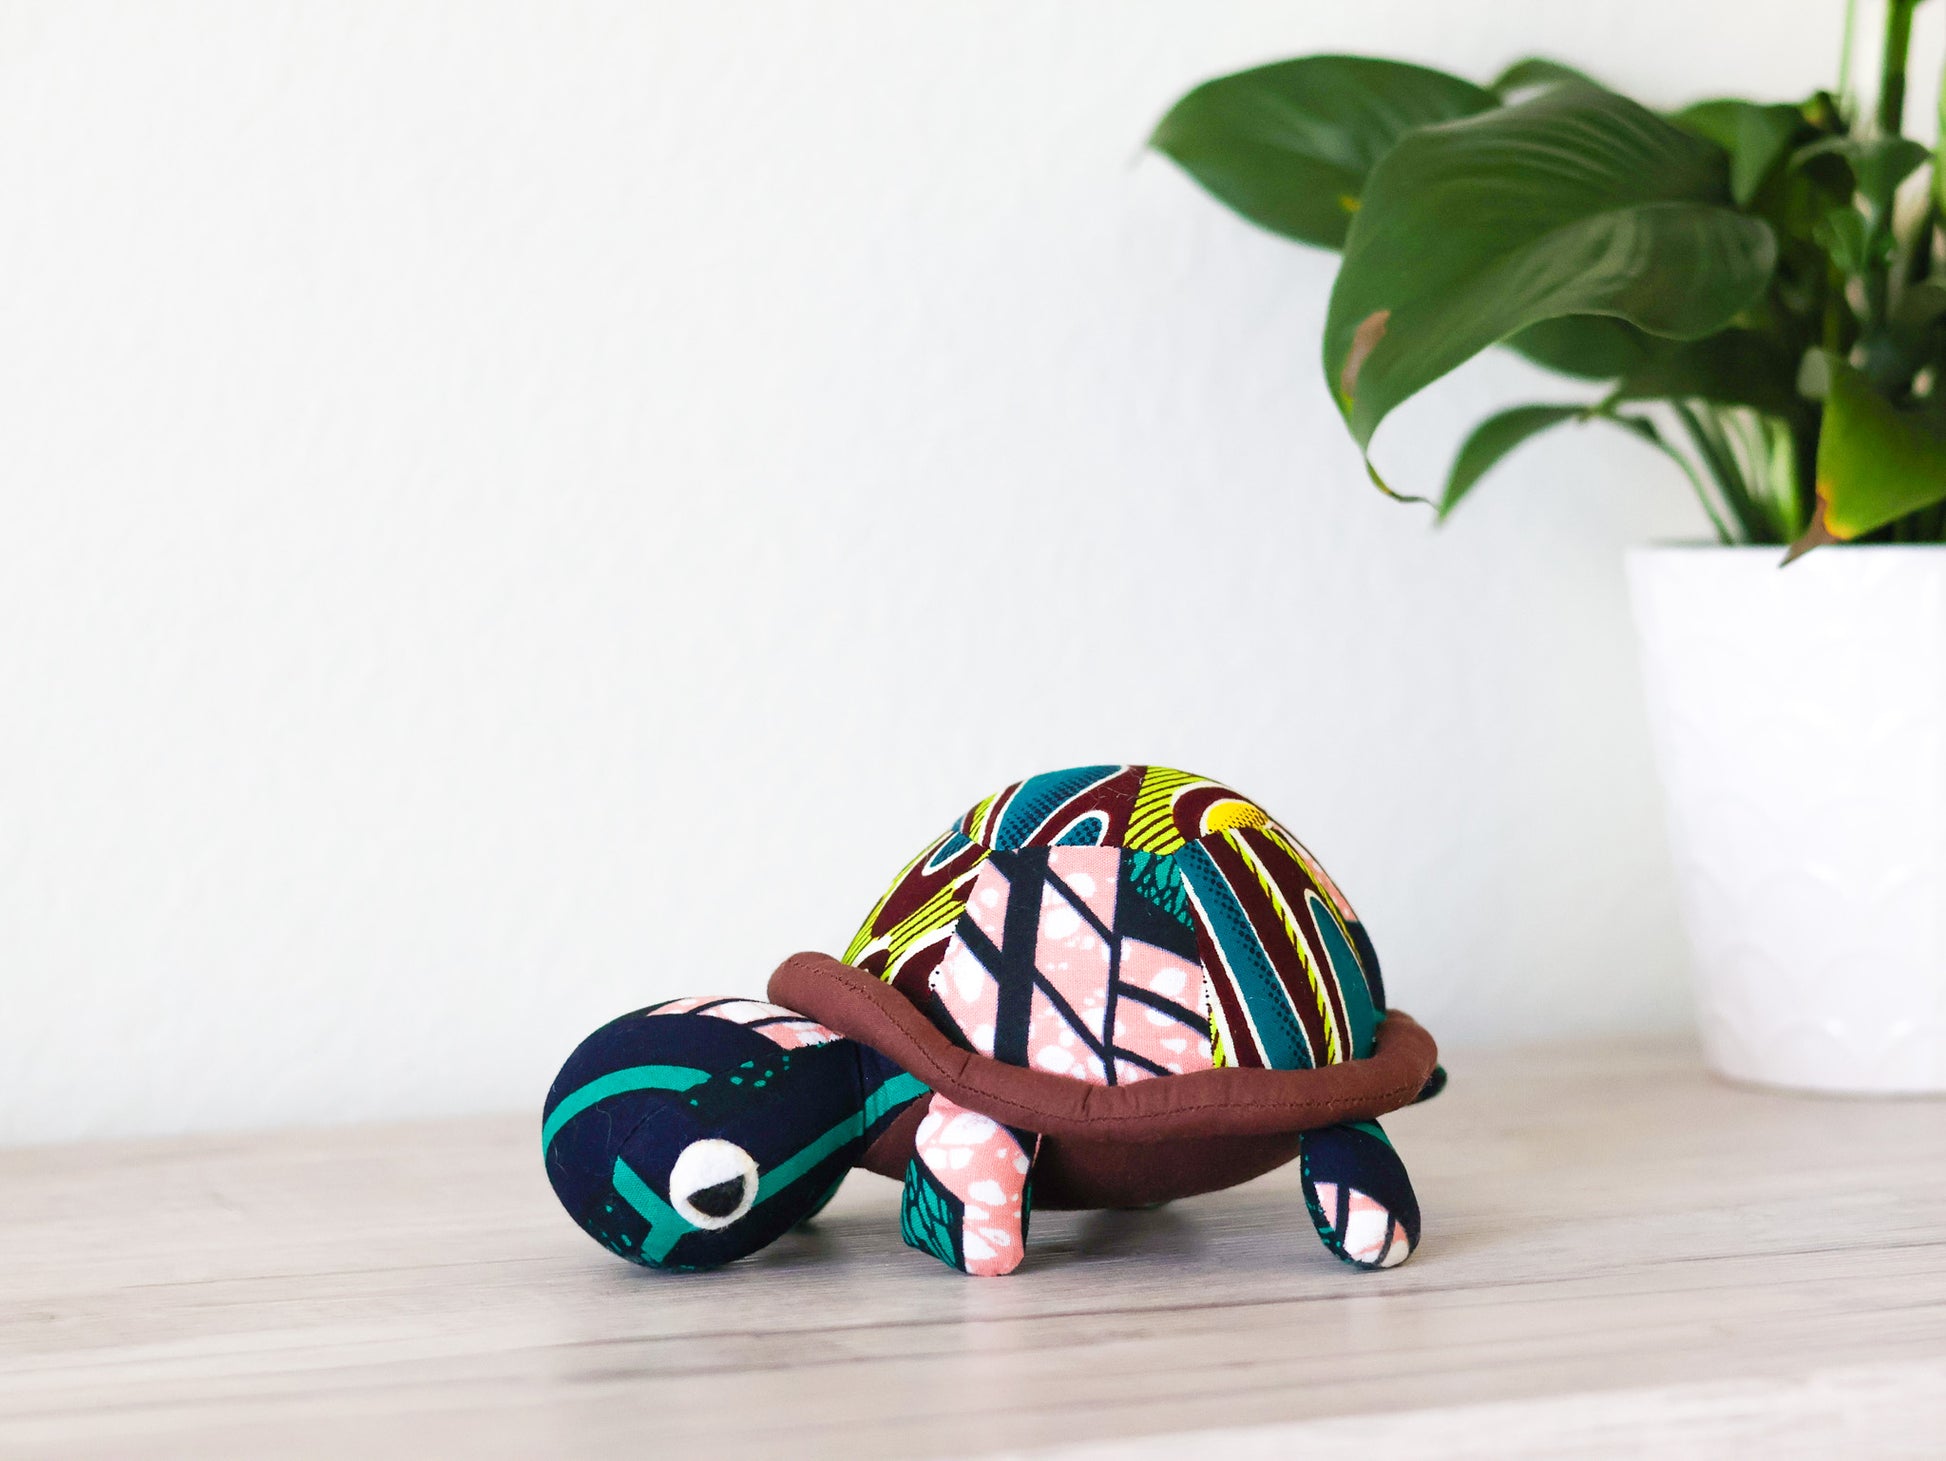 Turtle Soft Toy - Small Green - NDINI ACCESSORIES